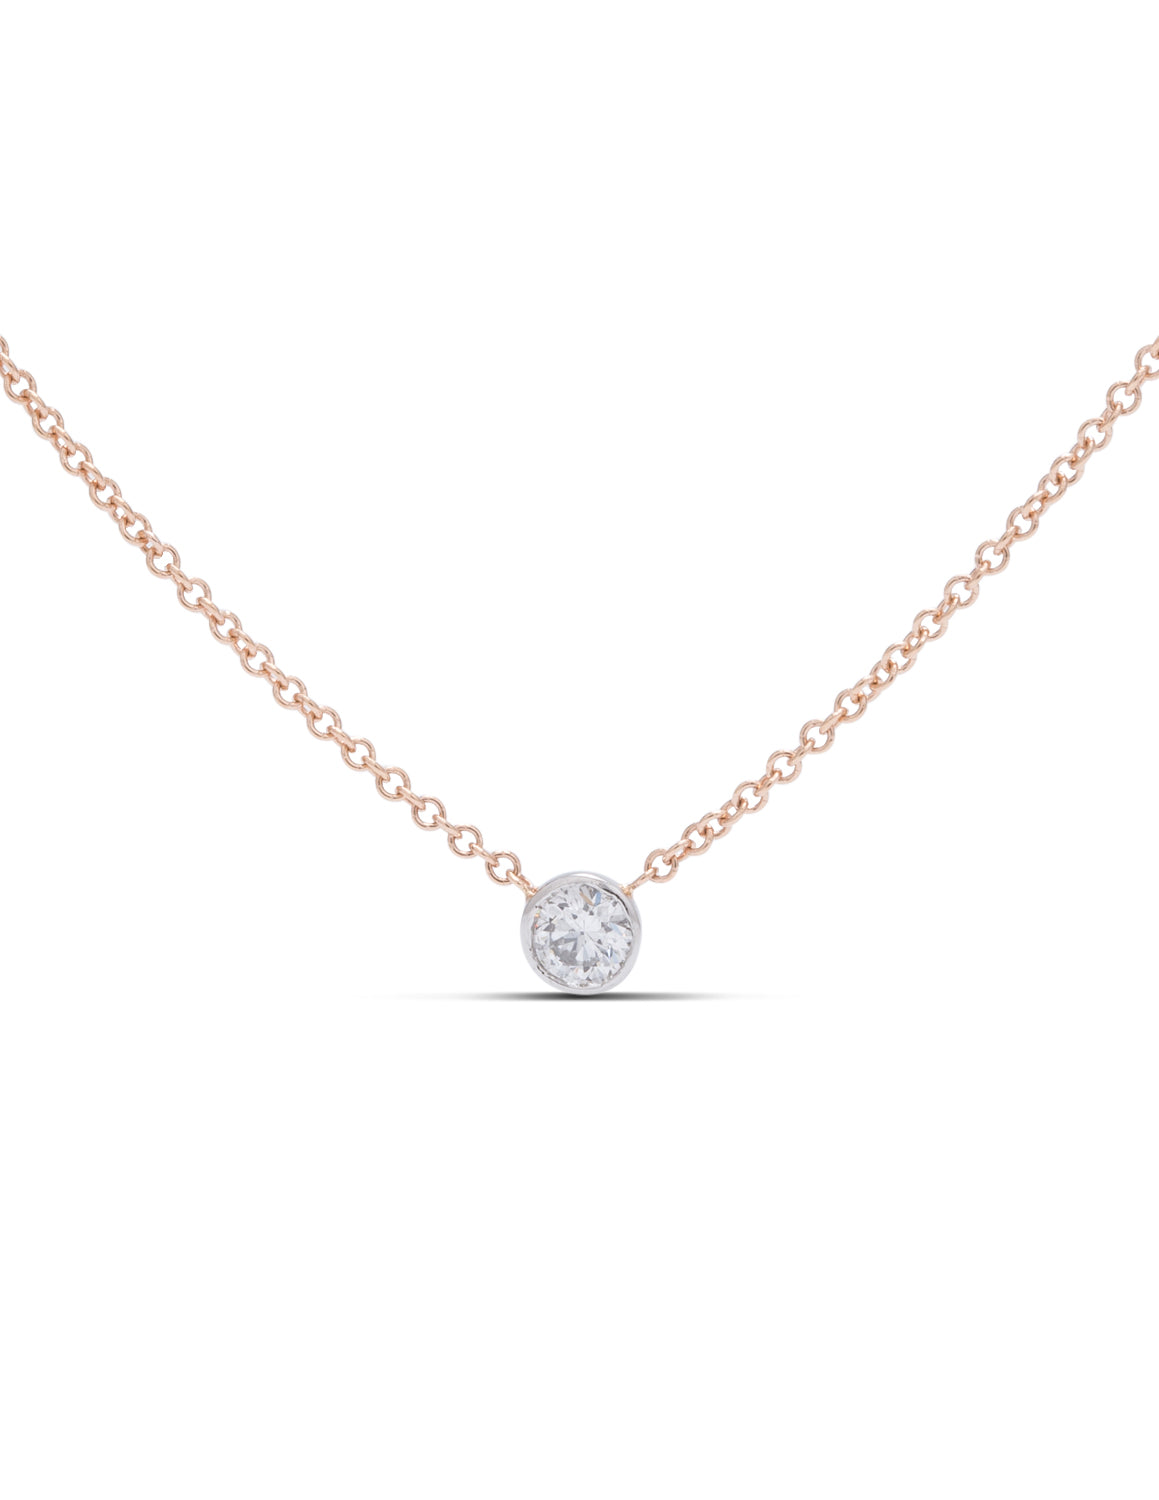 Delicate Bezel Set Diamond Solitaire Necklace - Charles Koll Jewellers